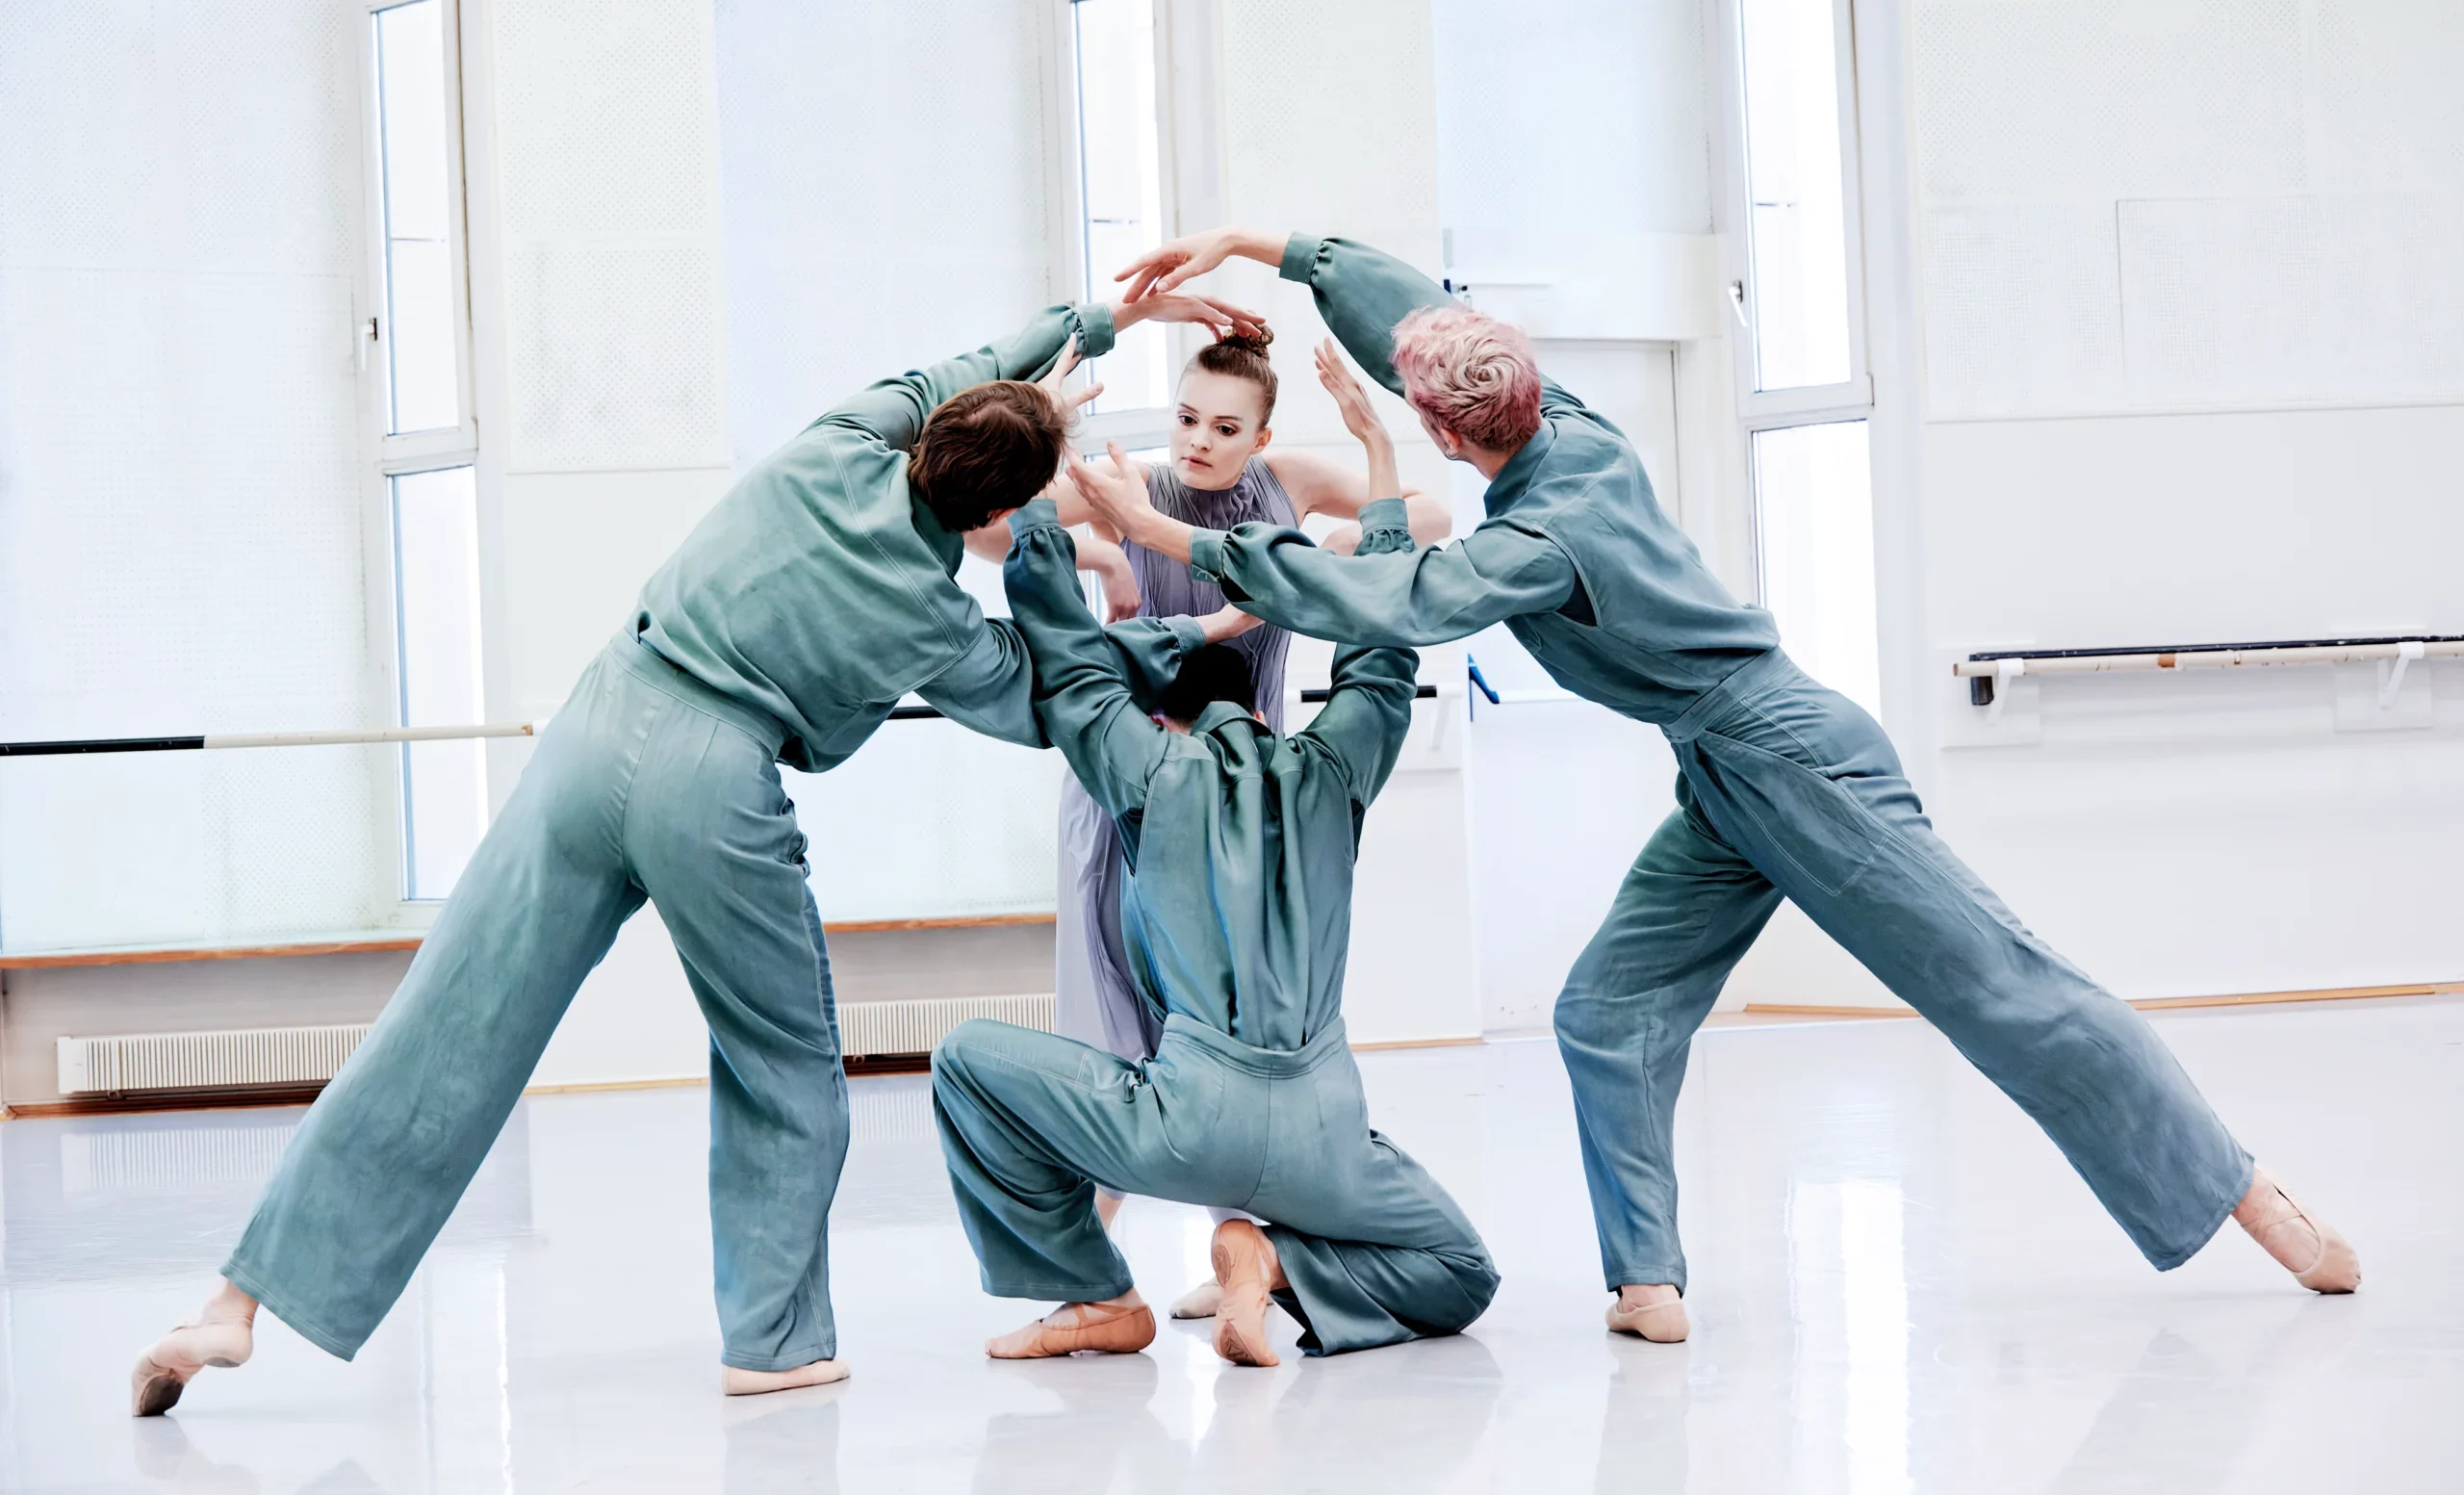 In a spacious, all-white dance studio, three male and one female dancer rehearse a new take on "Apollo" with the woman as the central figure. The men lean in toward her in crouches and lunges, and she peers through the negative space left by their arms, circling her head.